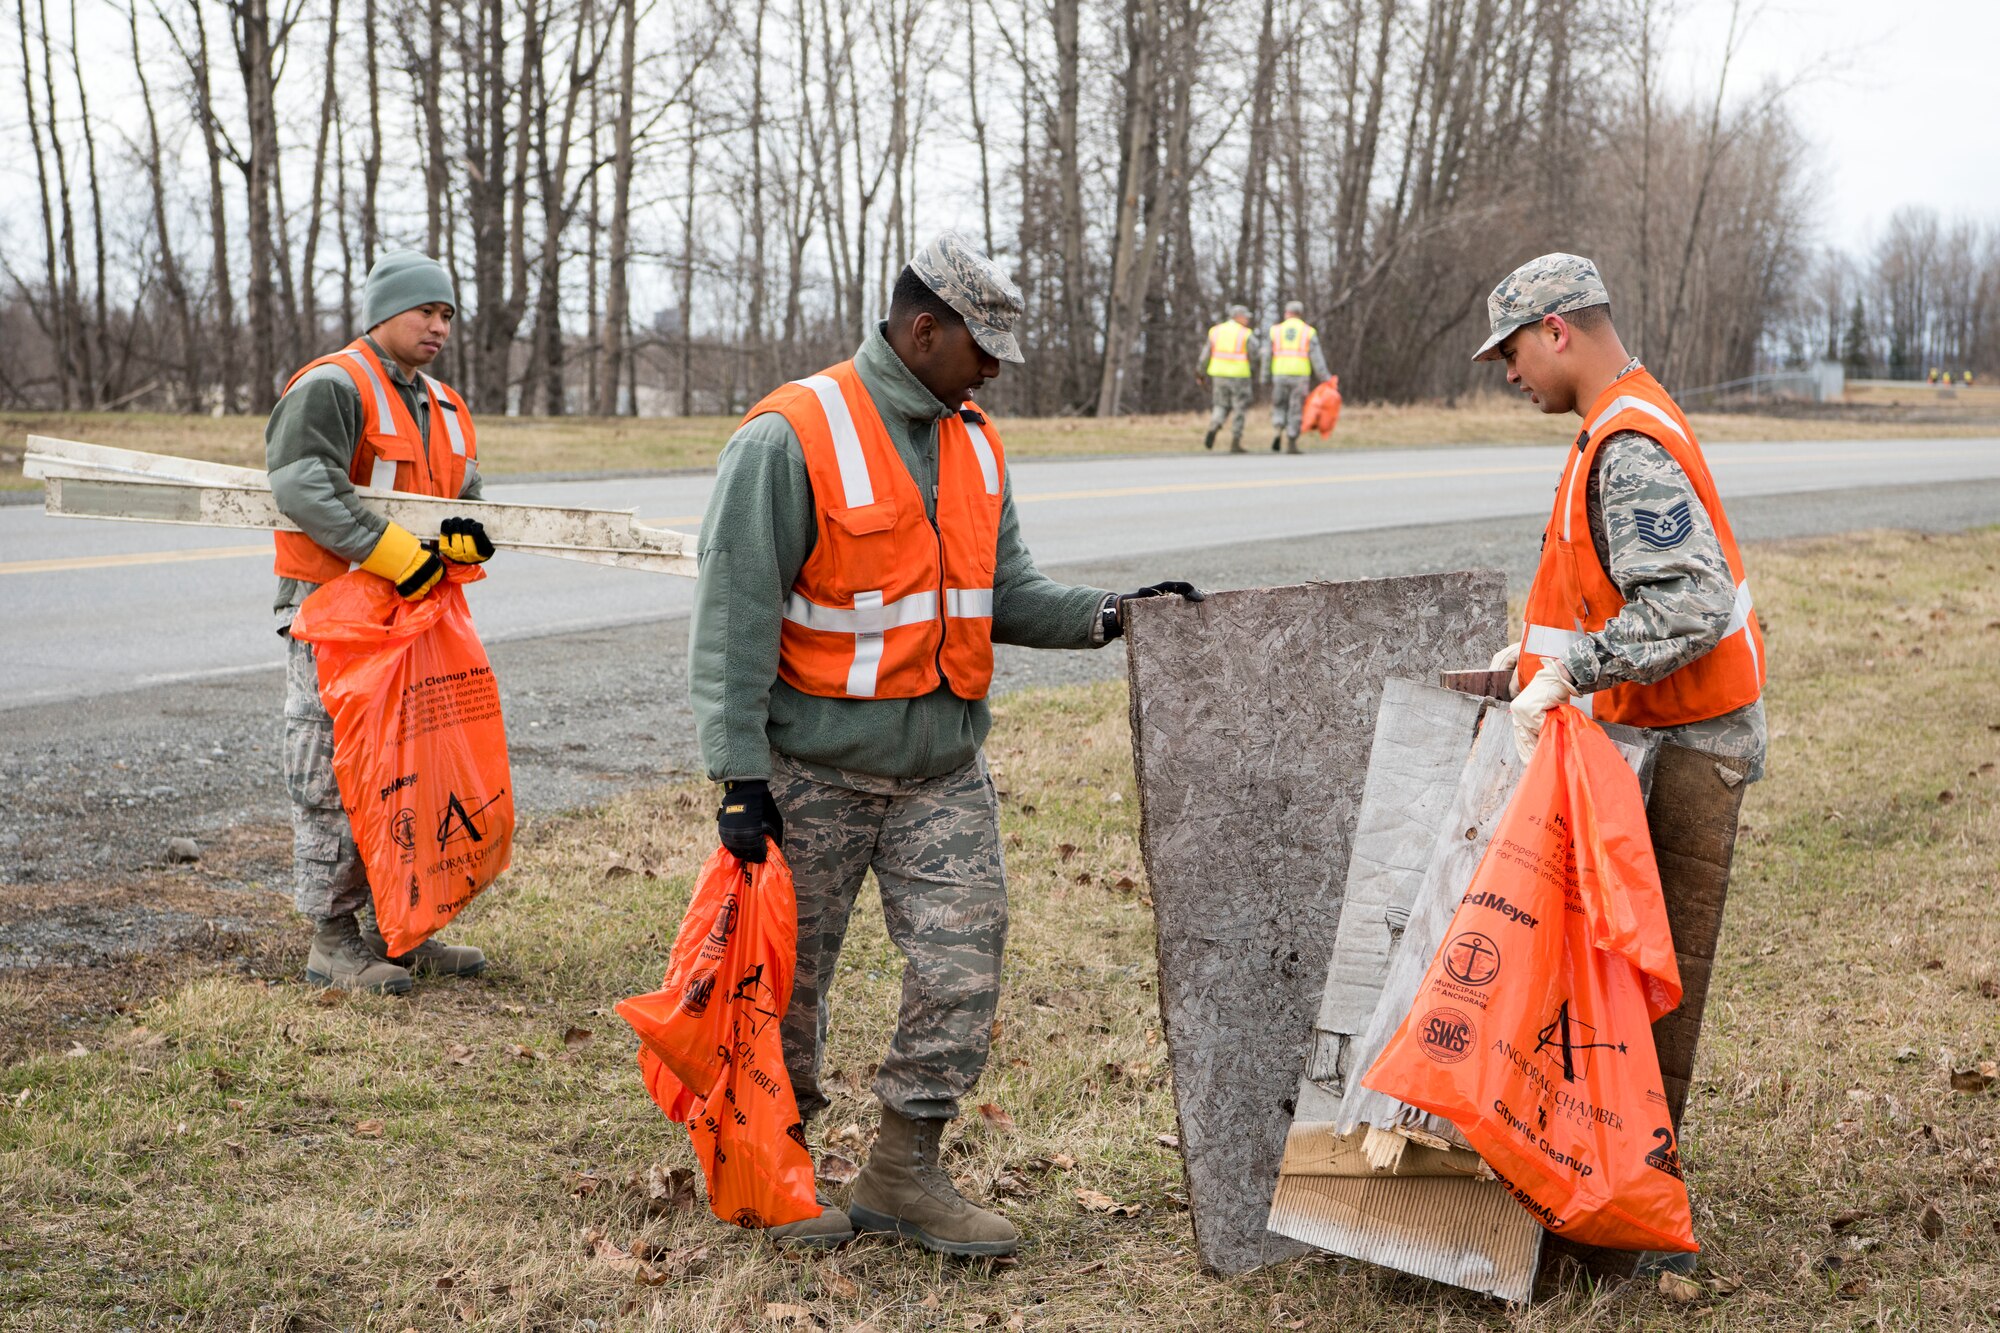 Airmen with the 773d Civil Engineer Squadron scan for trash and debris as they walk down a road at Joint Base Elmendorf-Richardson, Alaska, May 4, 2018. JBER participated in Operation Clean Sweep in support of the Anchorage Chamber of Commerce's 50th Annual Citywide Cleanup campaign.